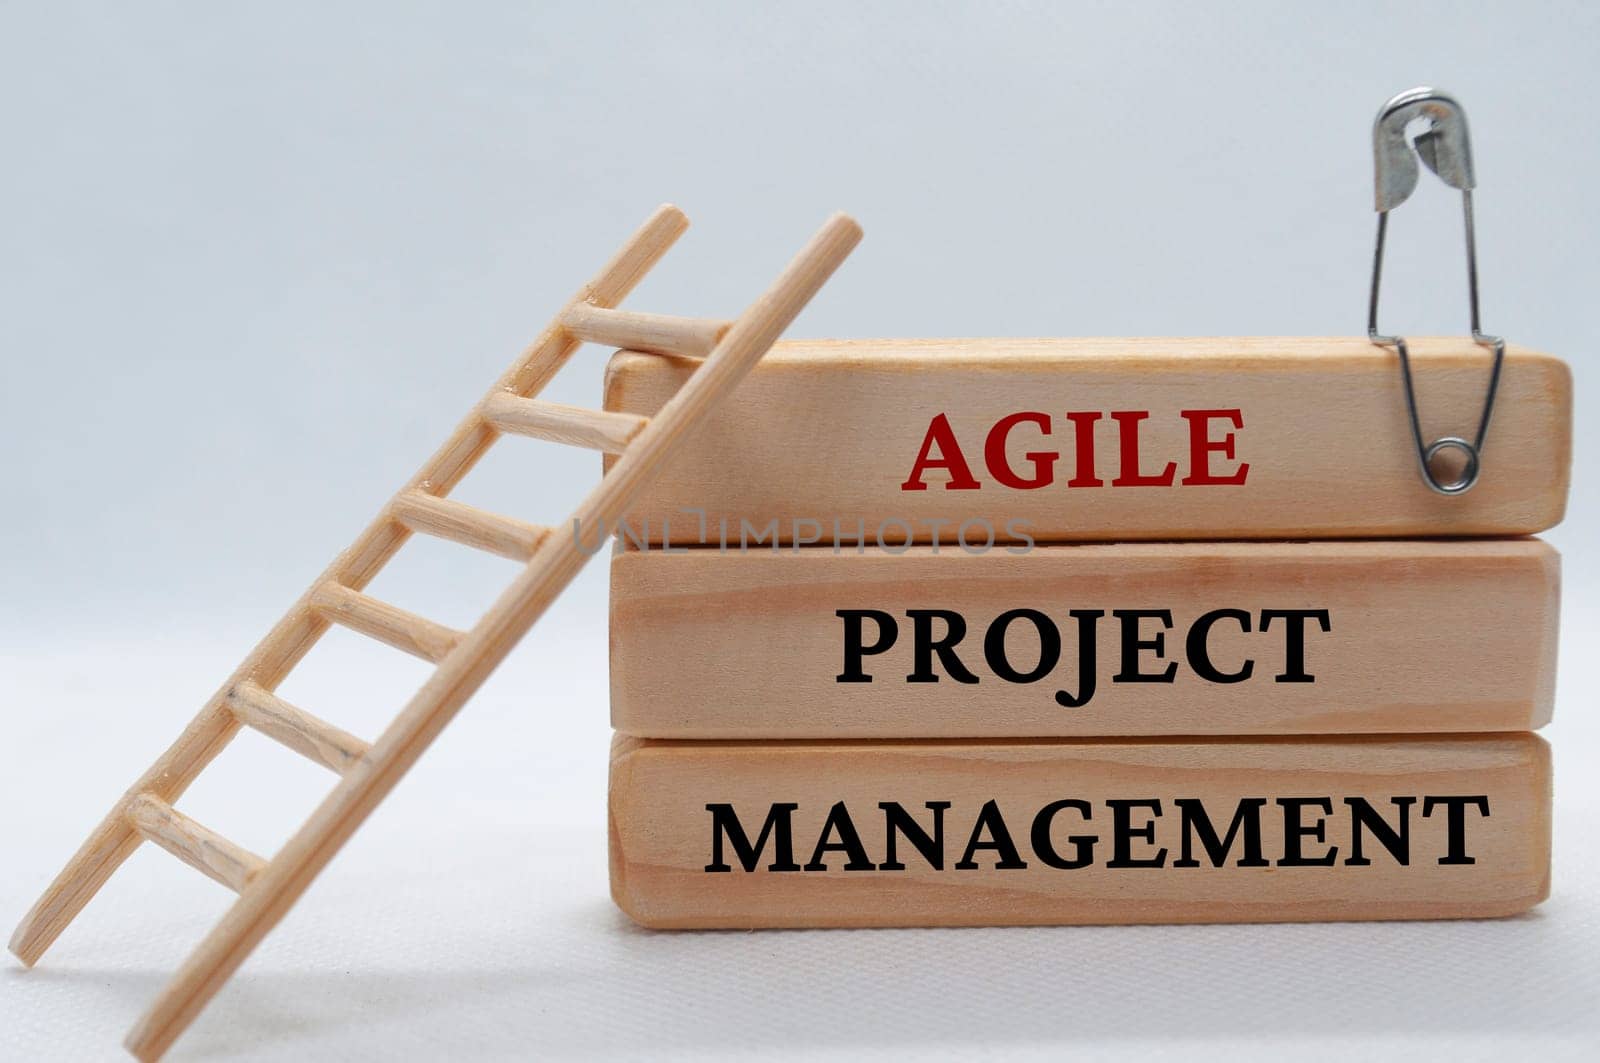 Agile project management text on wooden blocks with small toy ladder by yom98